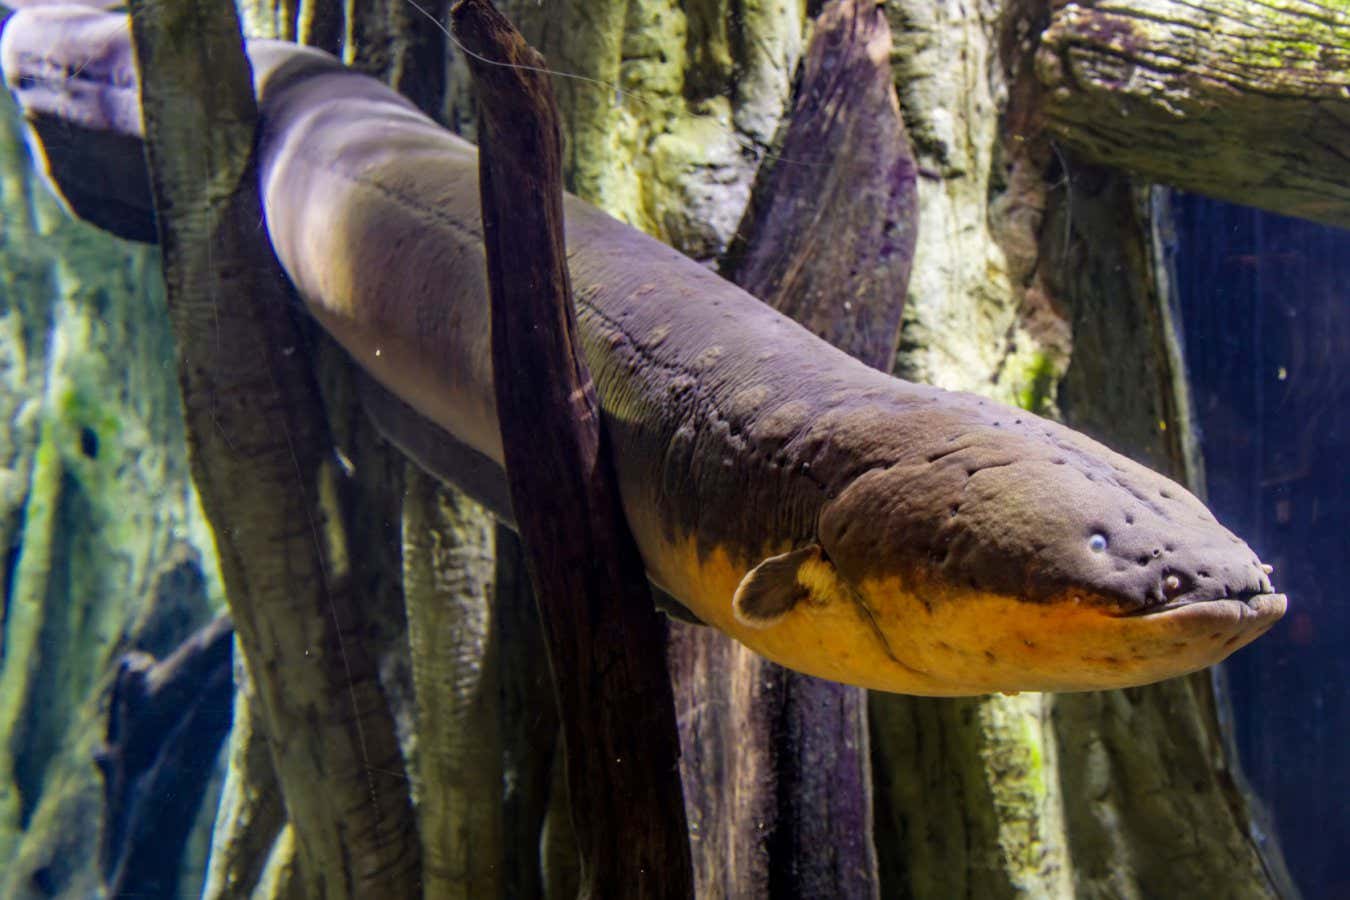 Electric eel zaps can genetically modify other nearby animals